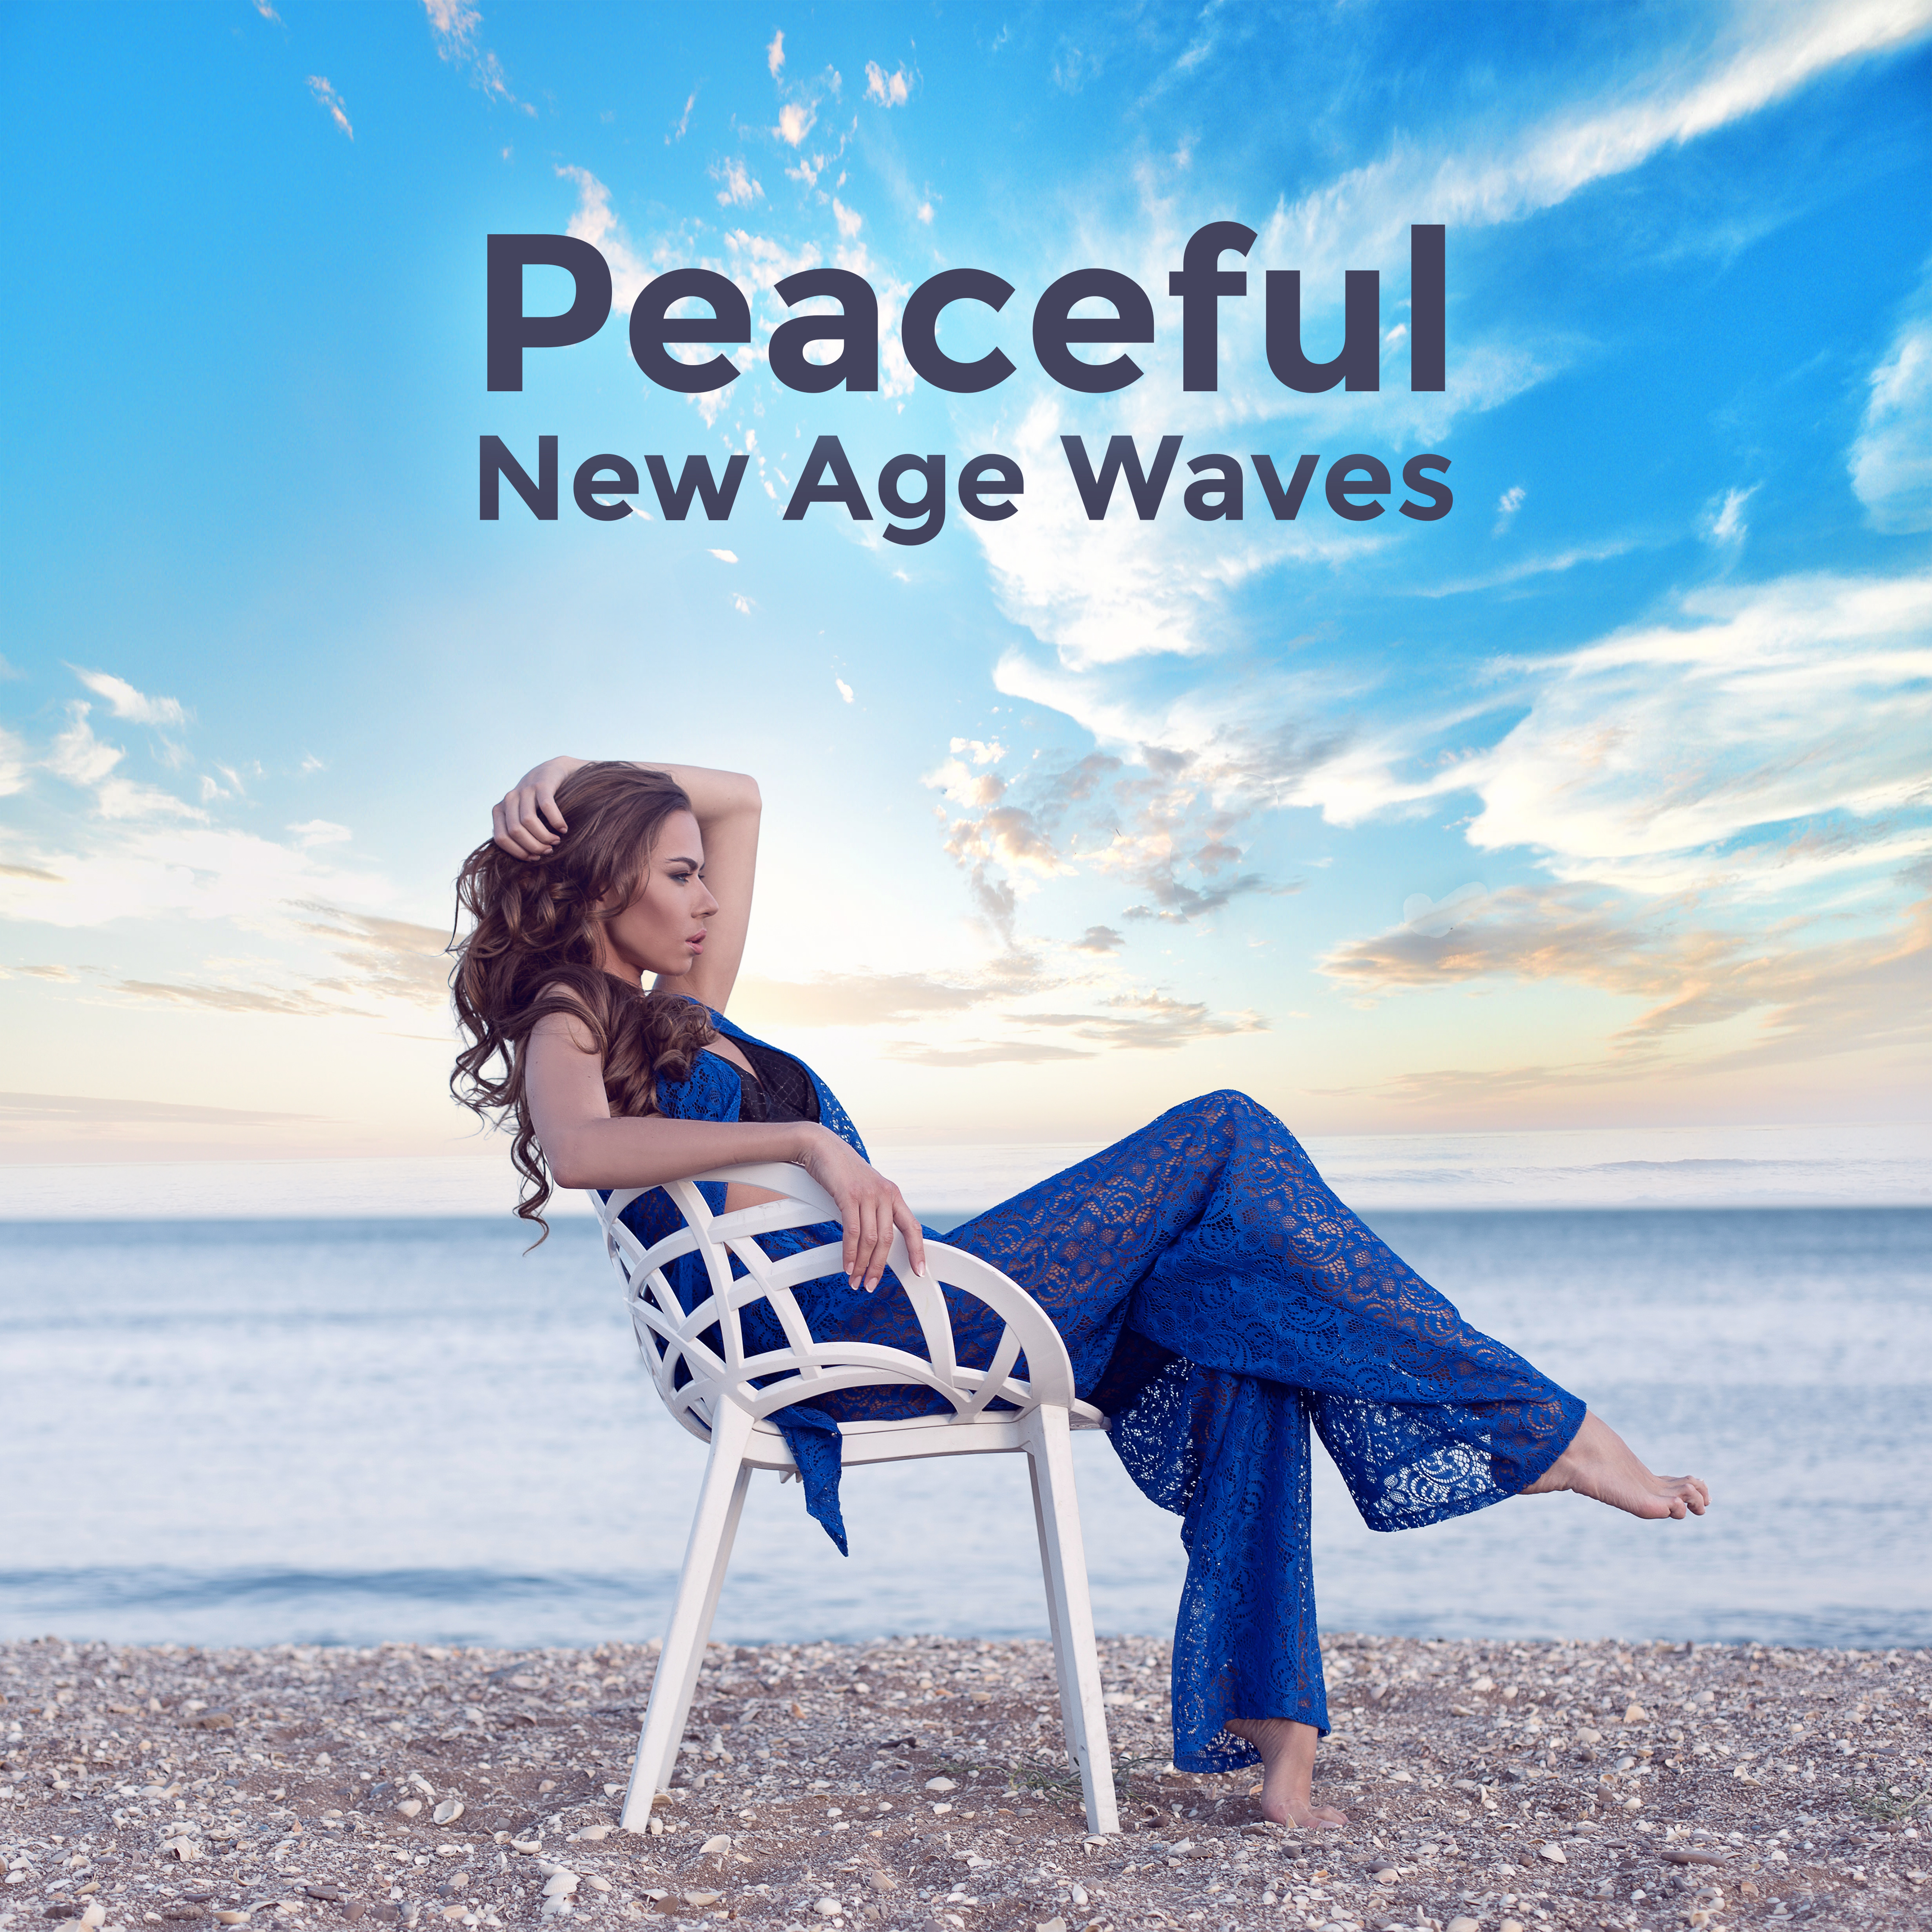 Peaceful New Age Waves